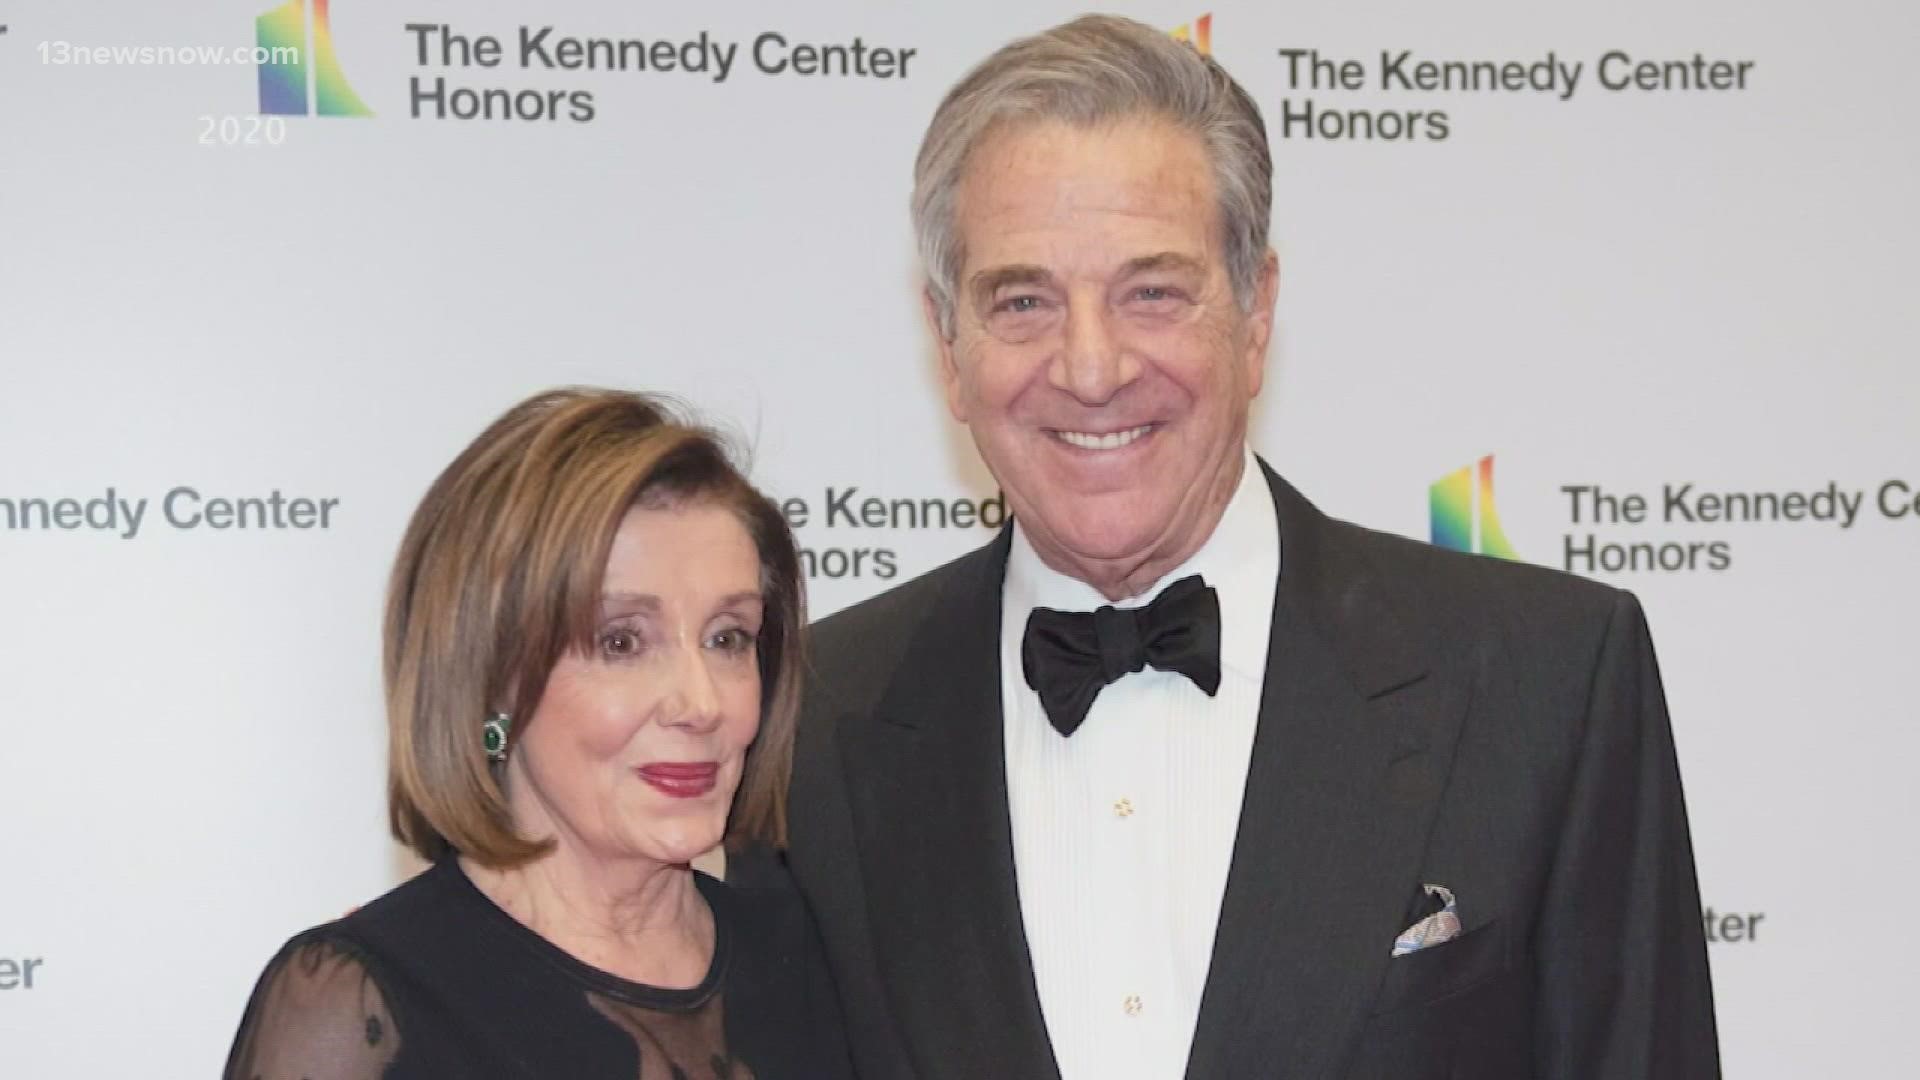 Virginia Gov. Glenn Youngkin has written to House Speaker Nancy Pelosi to apologize for widely criticized remarks he made after the October attack on her husband.